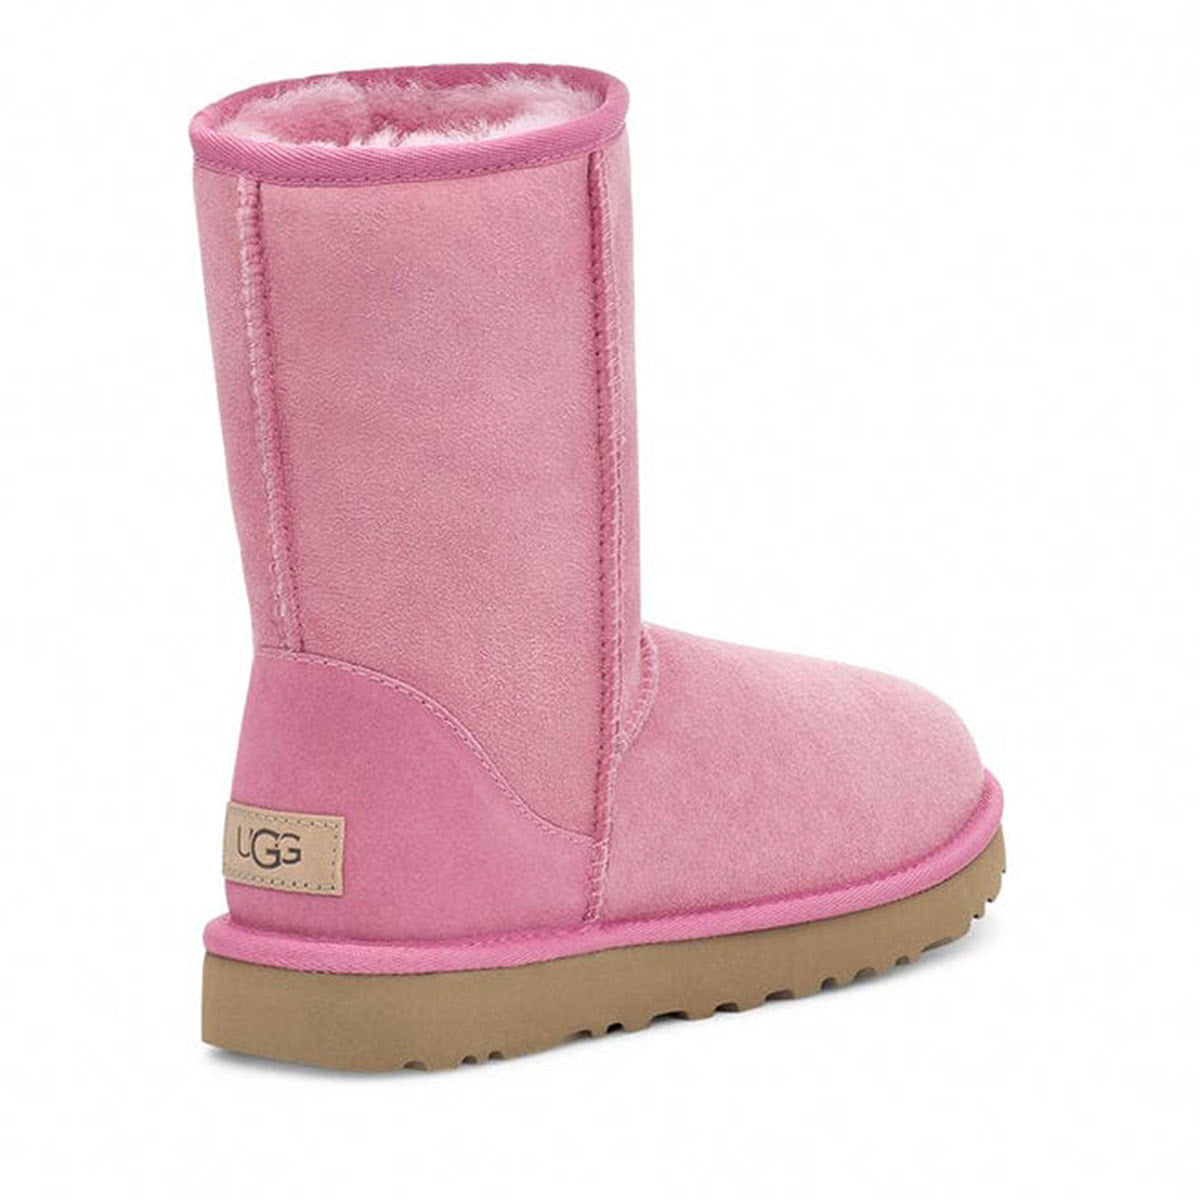 A pink UGG Classic Short II Wild Berry boot with a Twinface sheepskin exterior and a plush interior, featuring a Treadlite by UGG outsole.